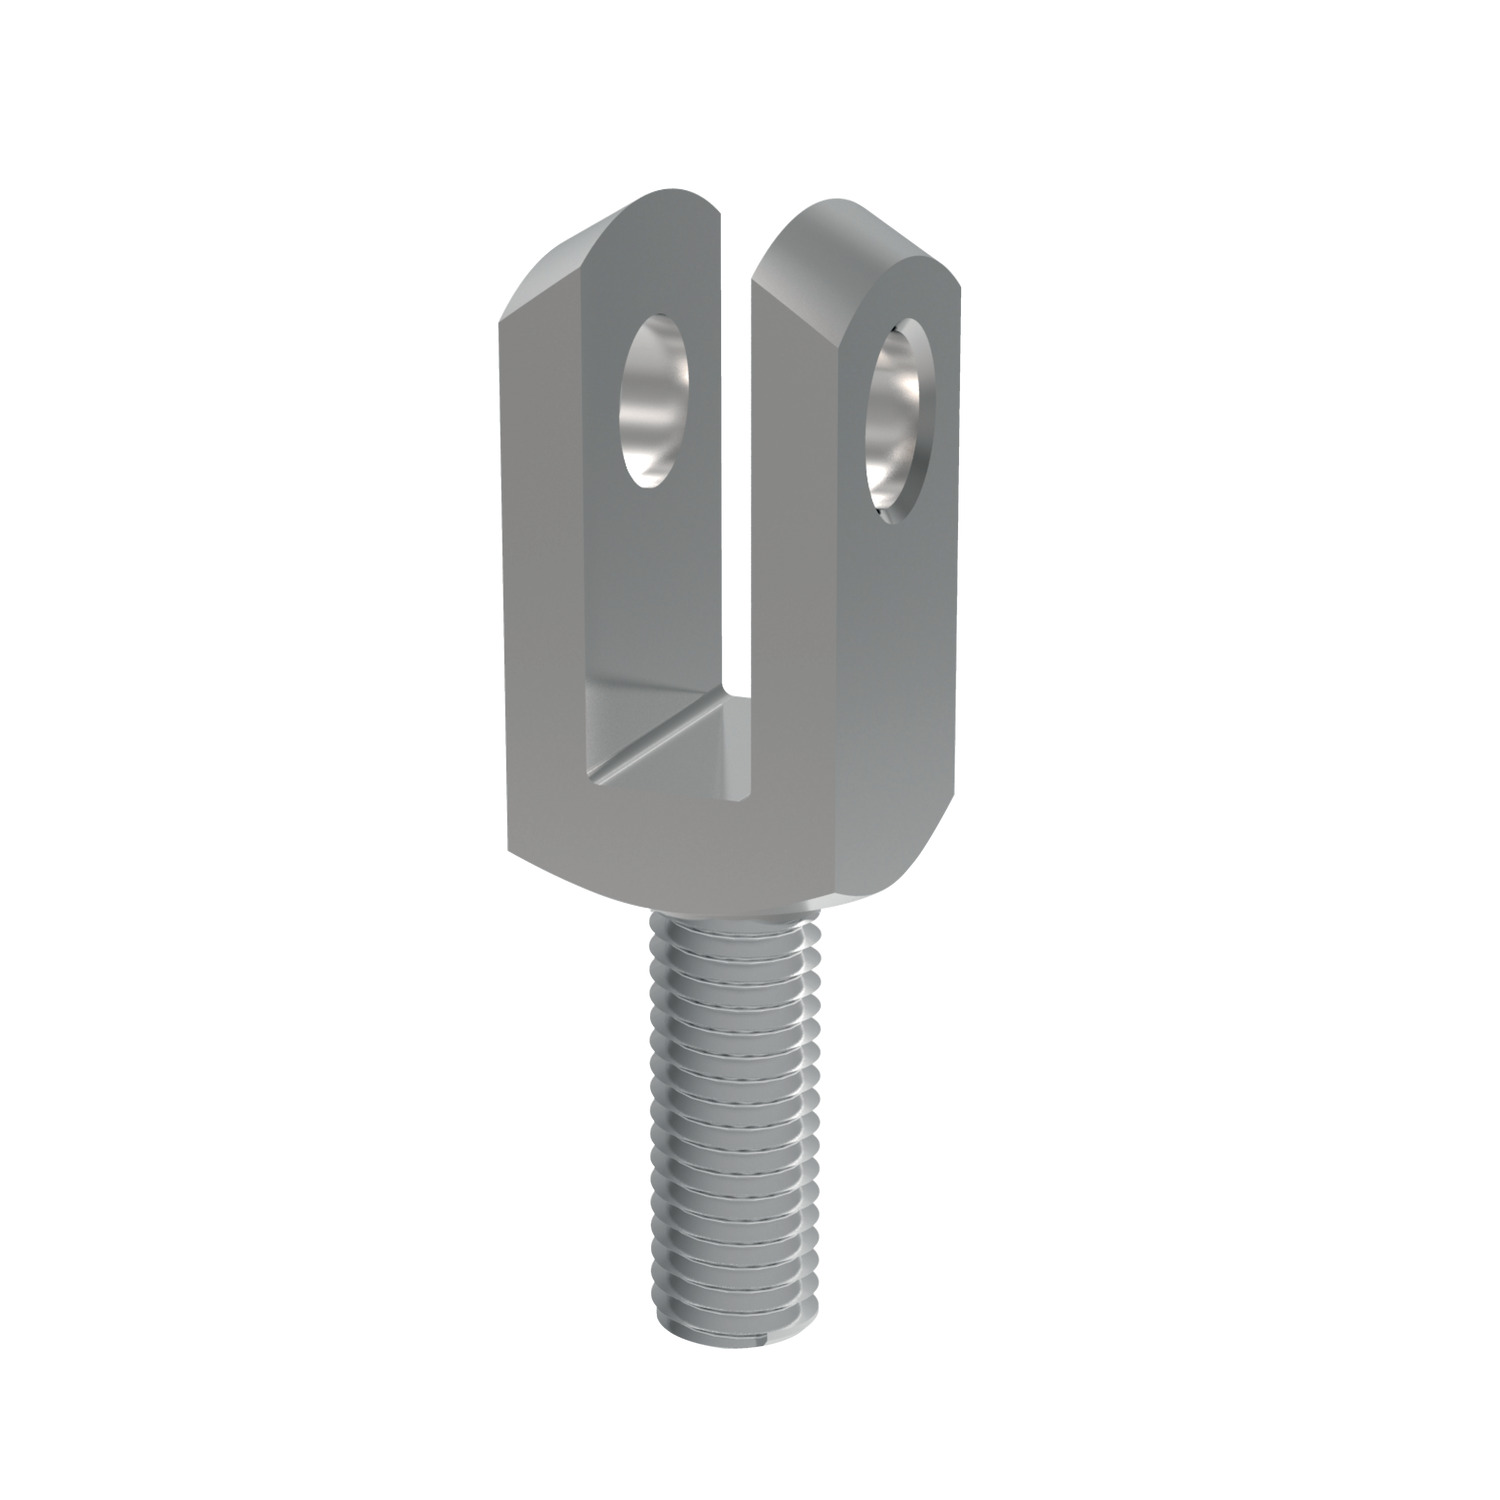 Product R3411, Male Clevis Joints left hand thread - silver zinc plated / 